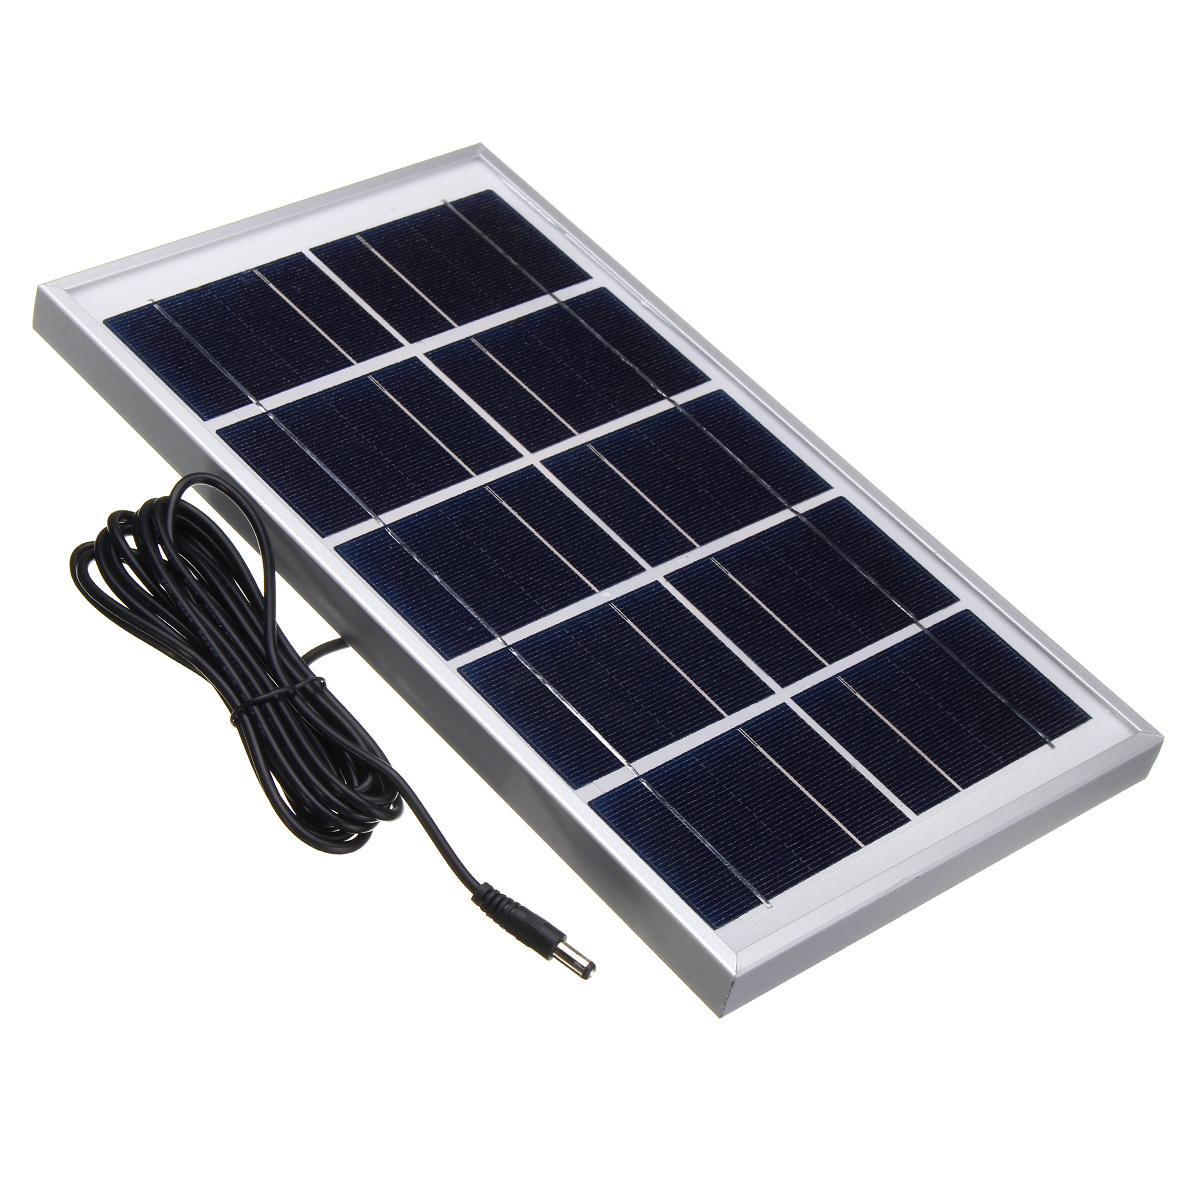 5V 7W Durdable Waterproof Polycrystalline Solar Panel Charger With 3M Cable For Emergency Light 2